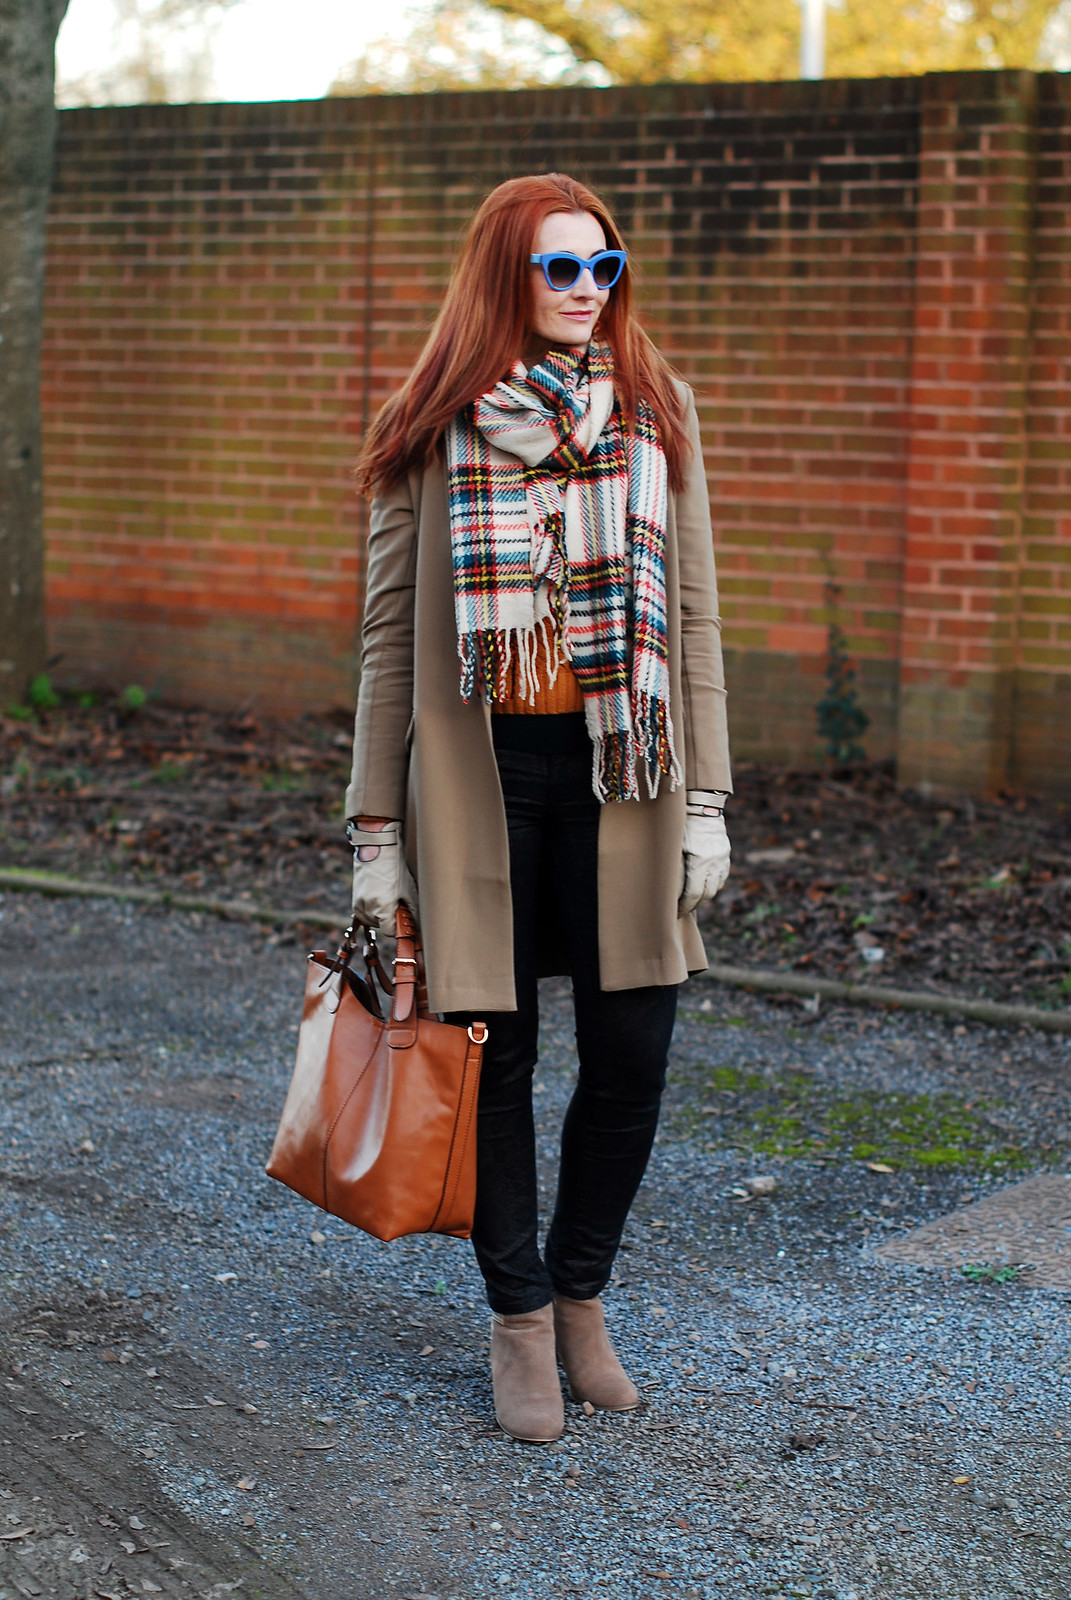 8 Ways to Wear Tartan / Checks / Plaid in Winter | Not Dressed As Lamb, over 40 fashion